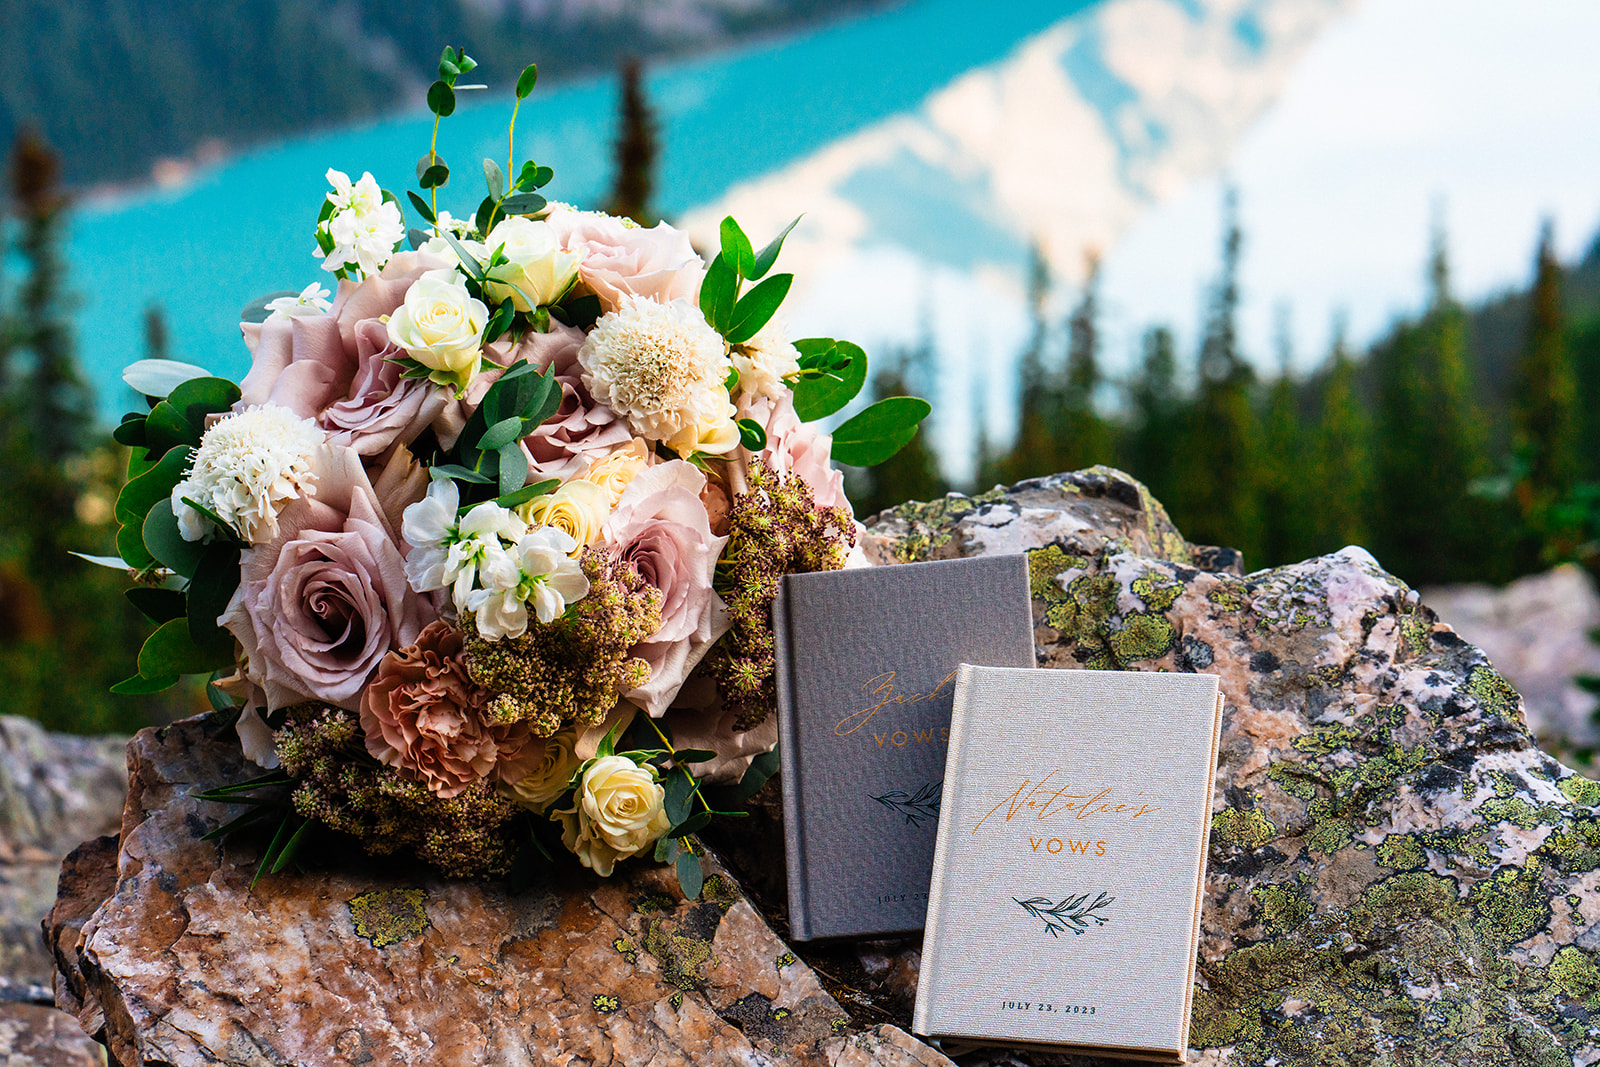 Bride and groom vows and floral bouquet with a view of Banff mountains and lake in the background